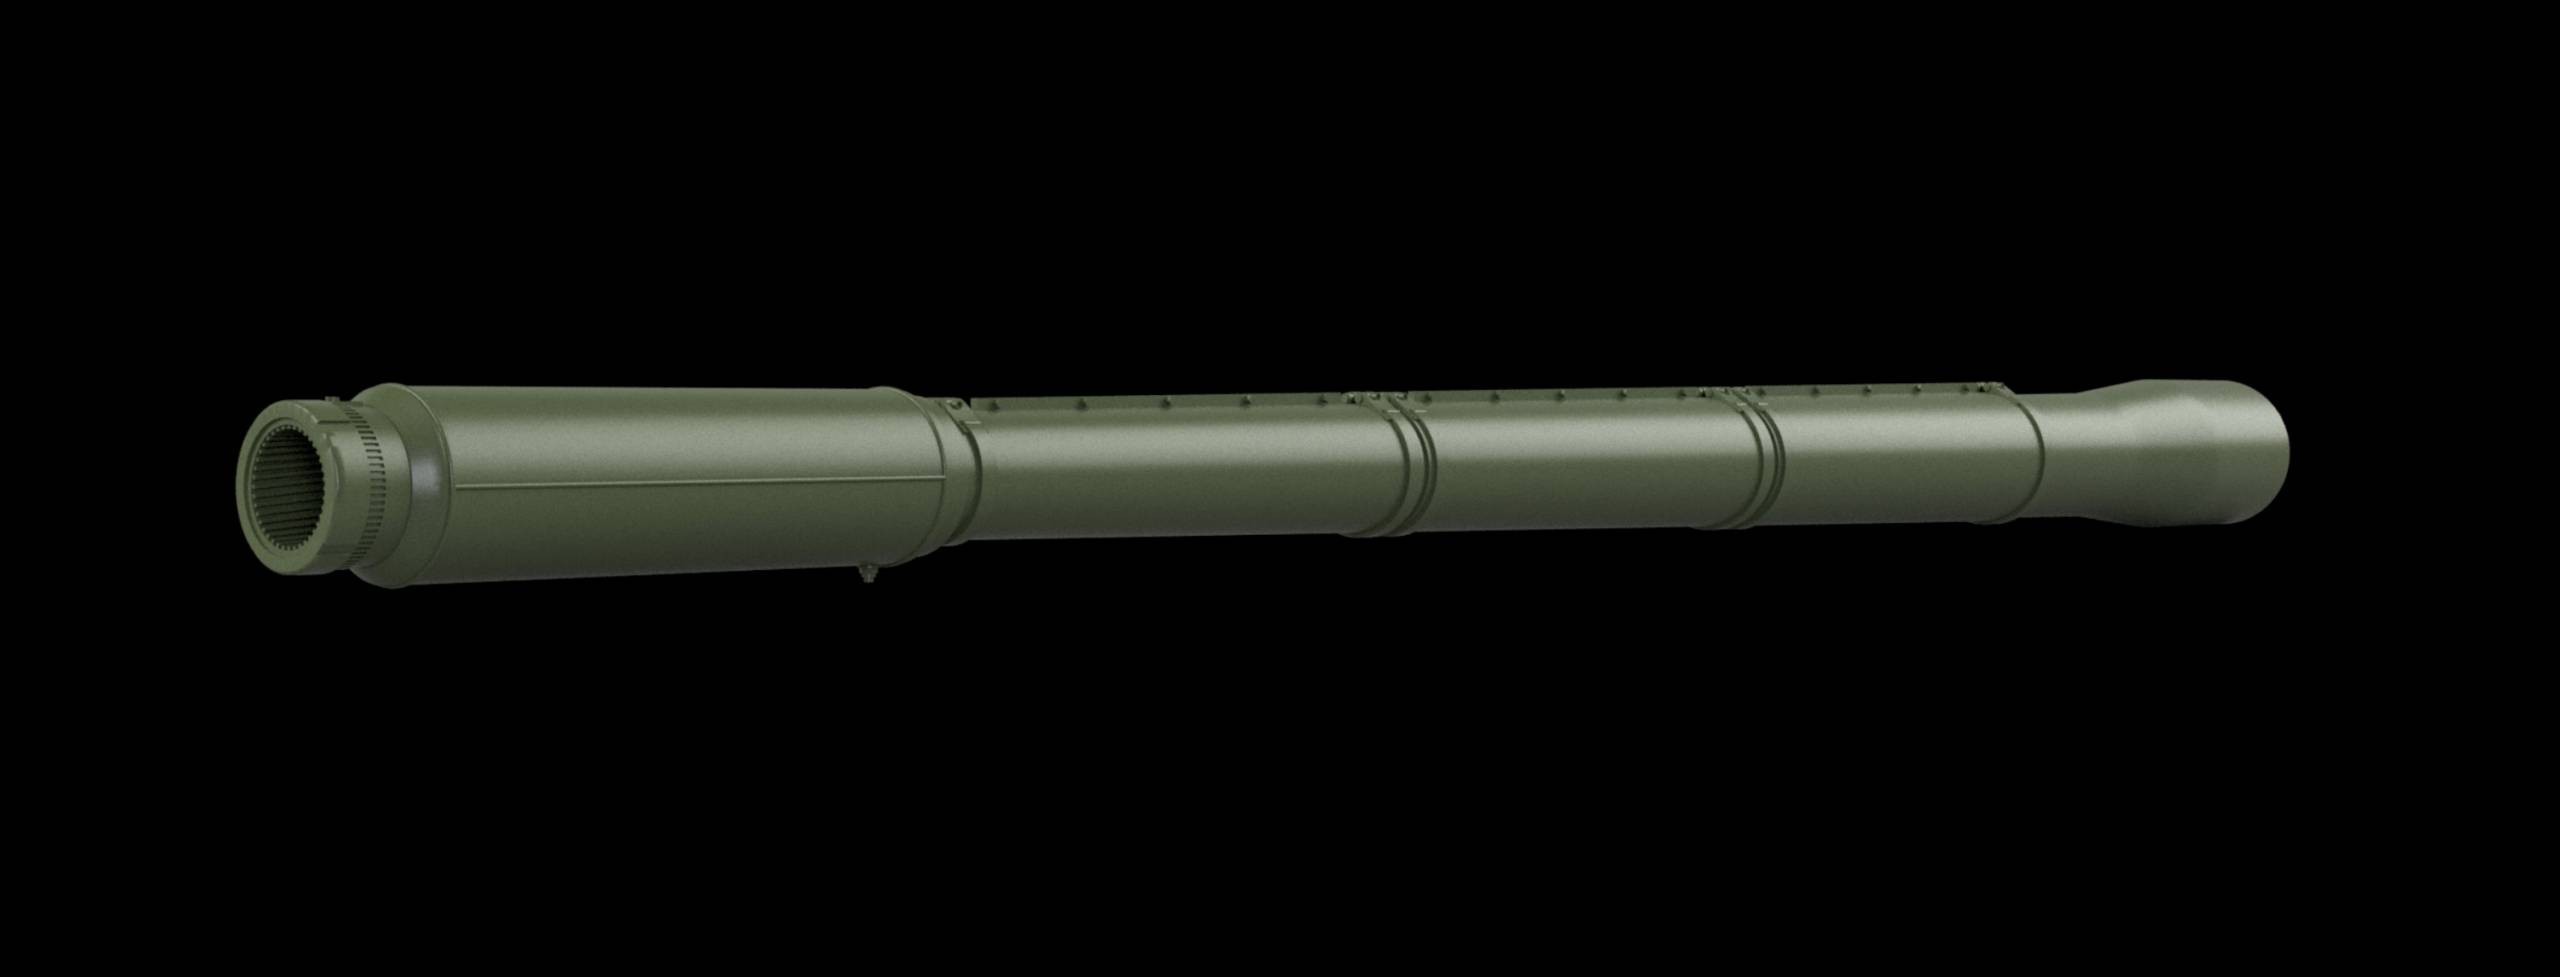 GB35-110 D-10T2S Gun barrel with thermak sleeve for T-55 MBT